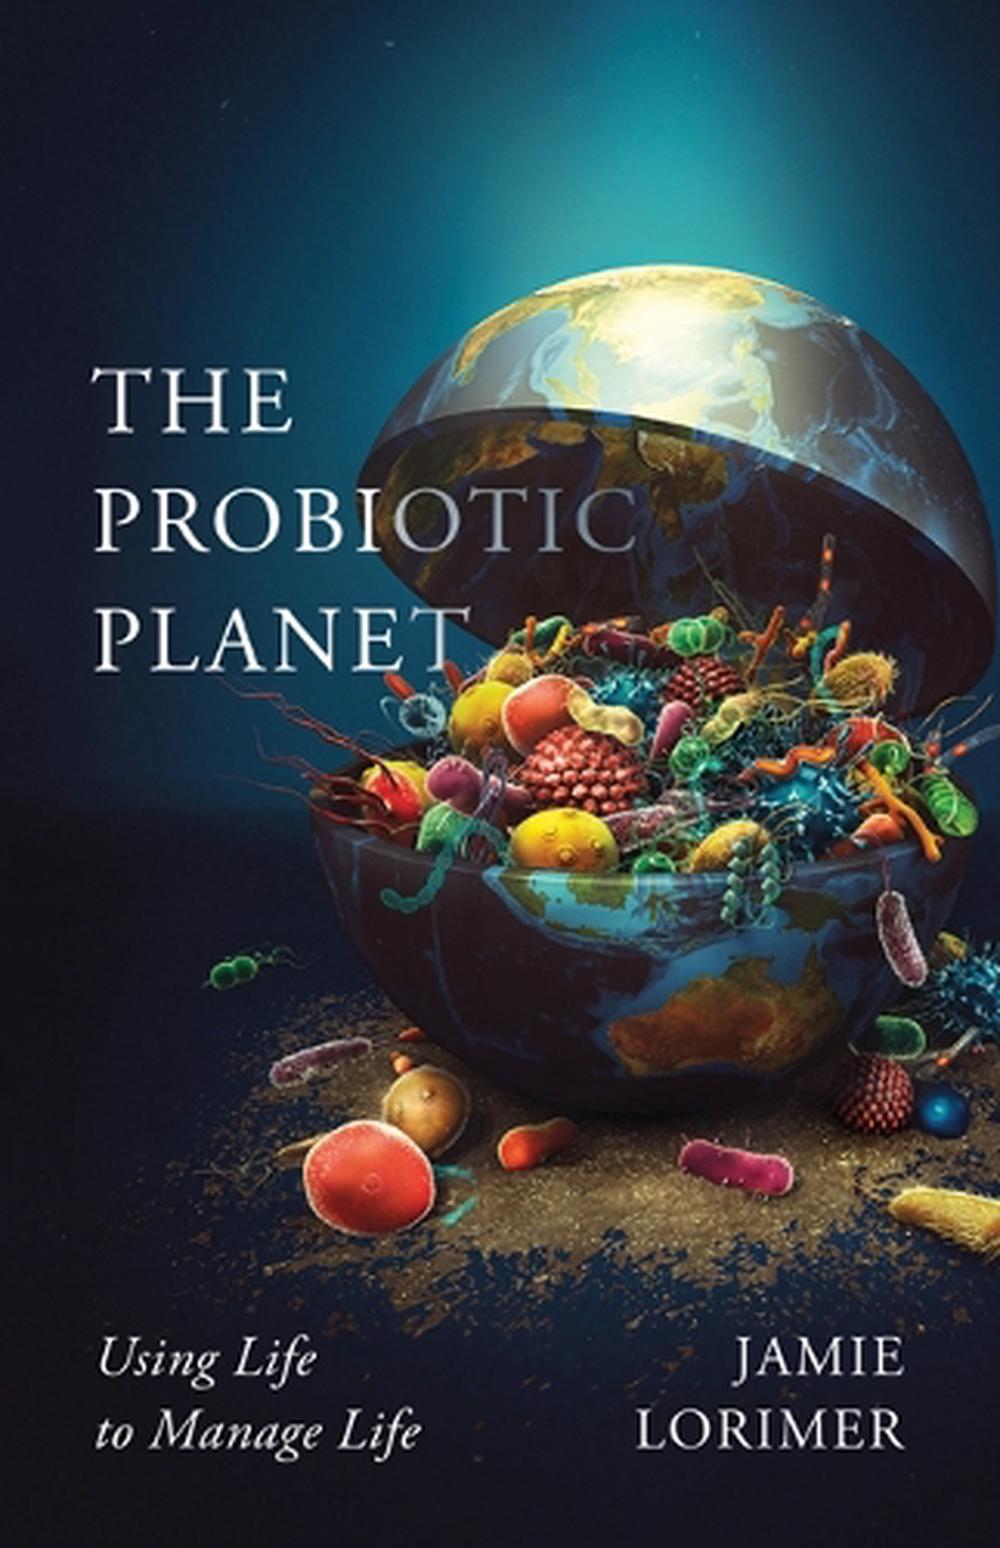 Buy　Paperback,　at　The　Probiotic　Jamie　online　Planet　by　The　Lorimer,　9781517909215　Nile